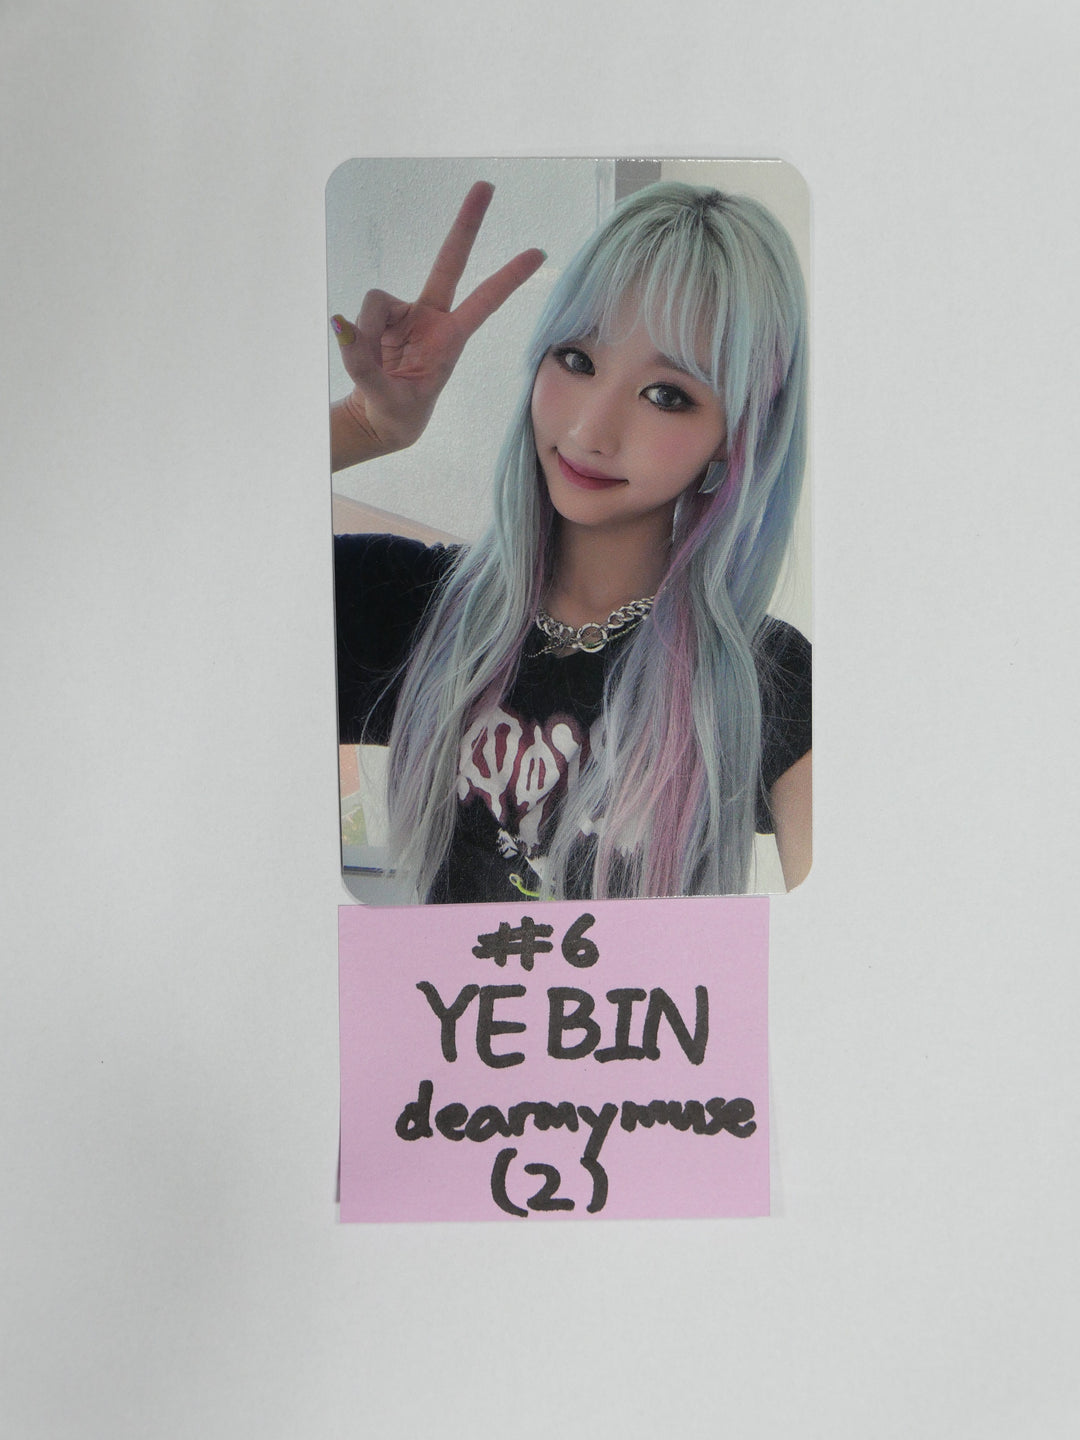 HOT ISSUE 1st Single Album 'ICONS' - Dear My Muse Fansign Event Photocard